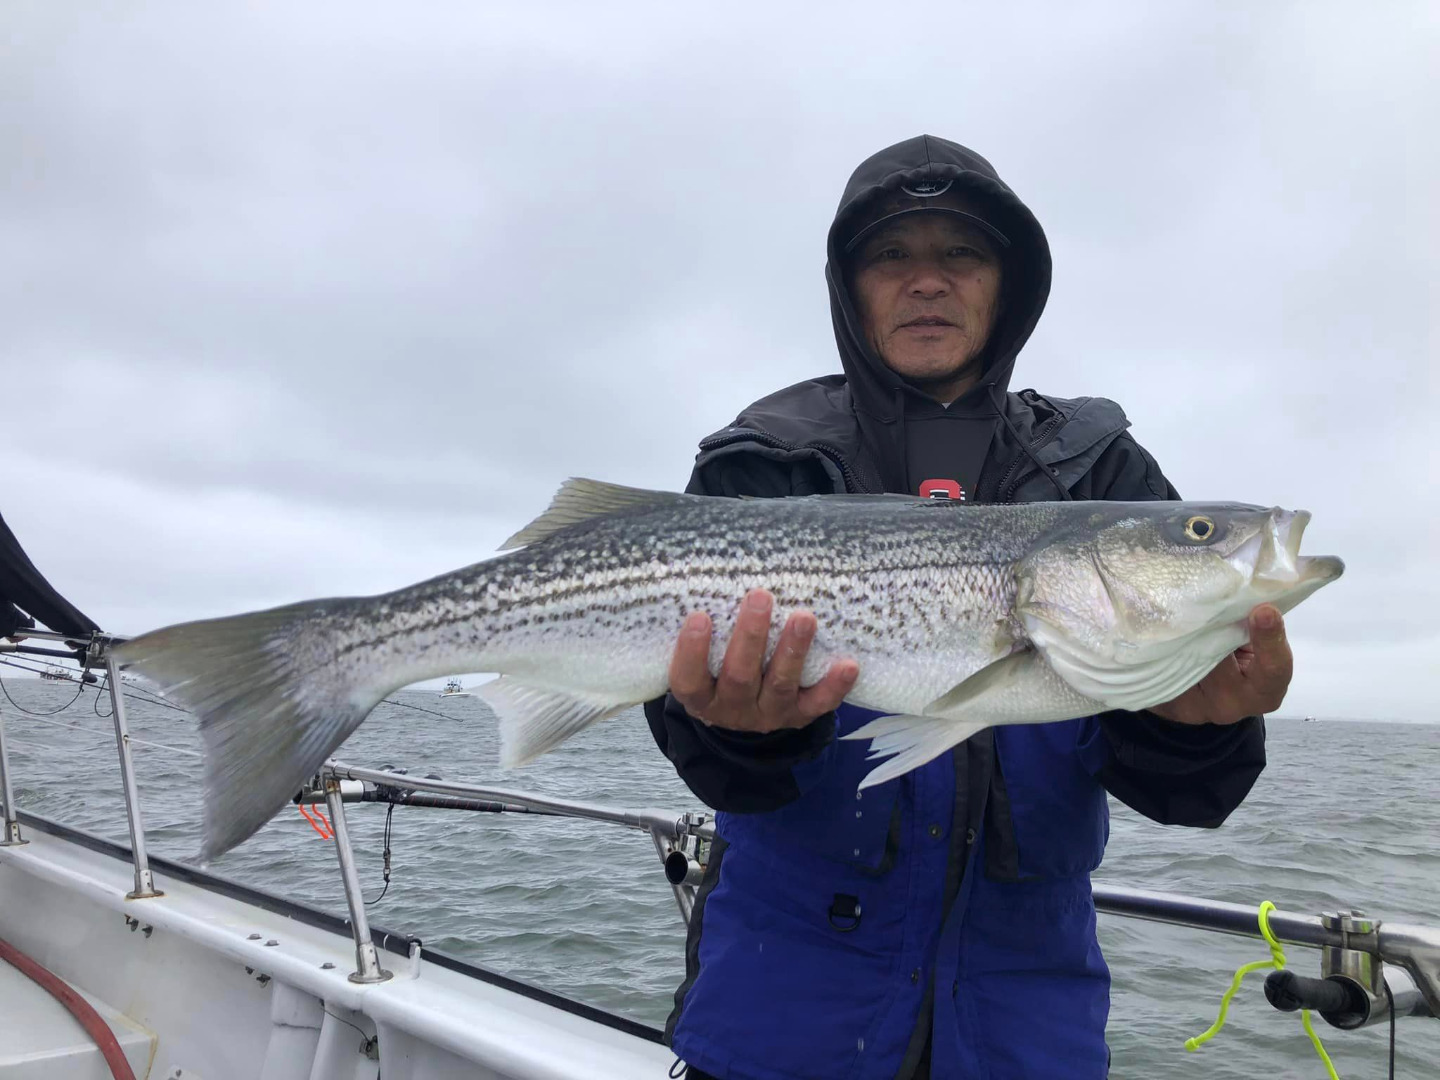 Outstanding striped bass fishing once again